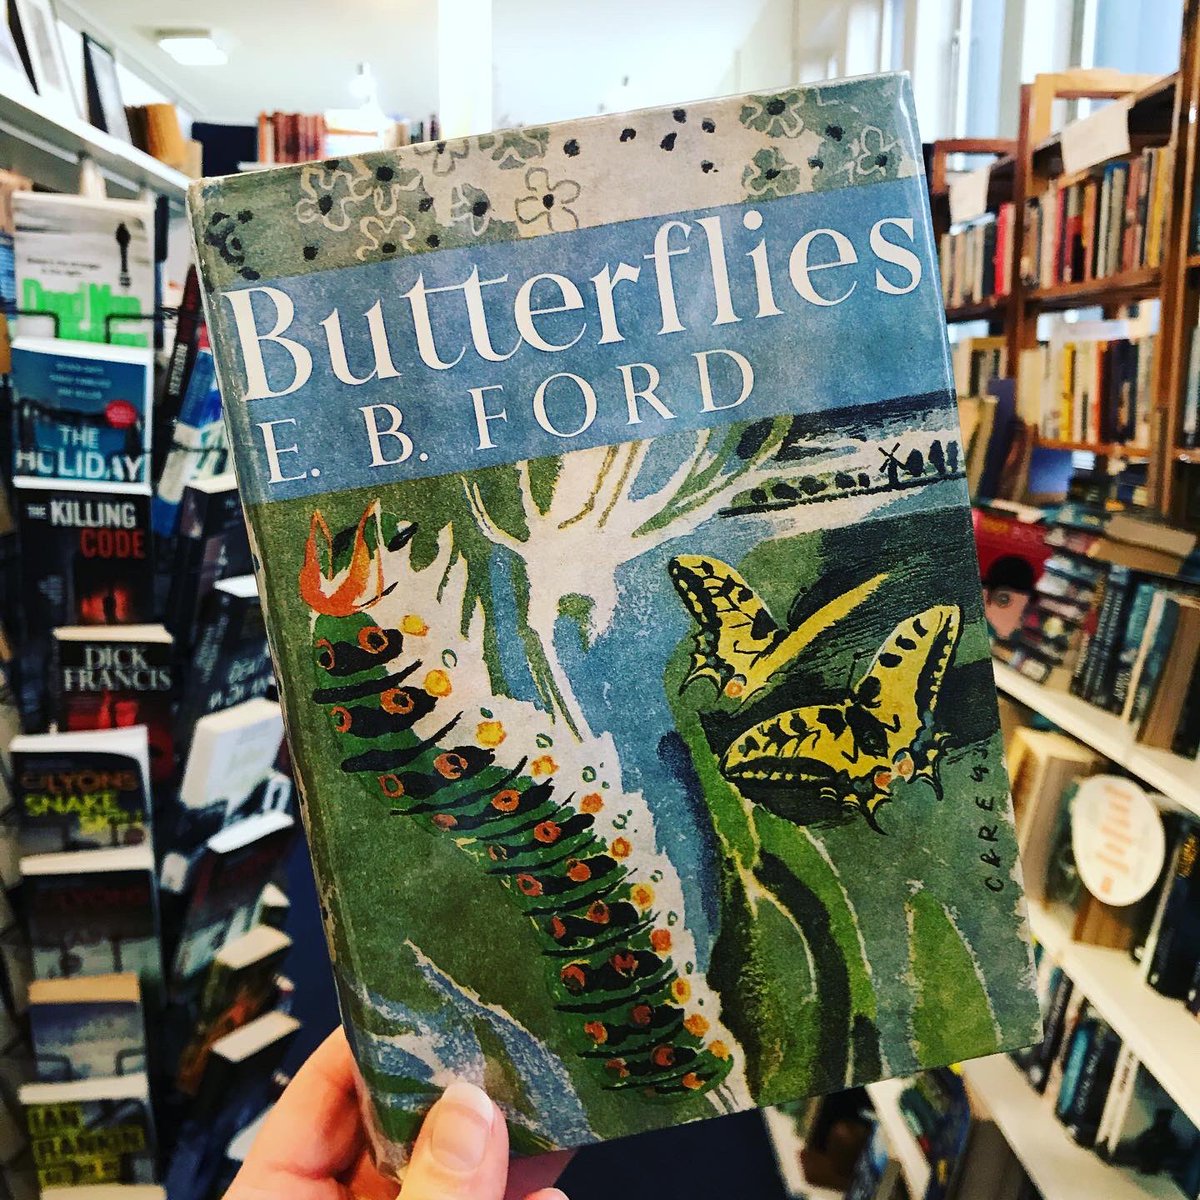 We’ve just acquired some lovely books from various sellers. Also, our sale continues in store. #bargains #bookshop #books #shrewsbury #shropshire #nature #reading #loveyourmarket #bookworm #shelfie #smallbusiness #localbusiness #booklife #bookstore